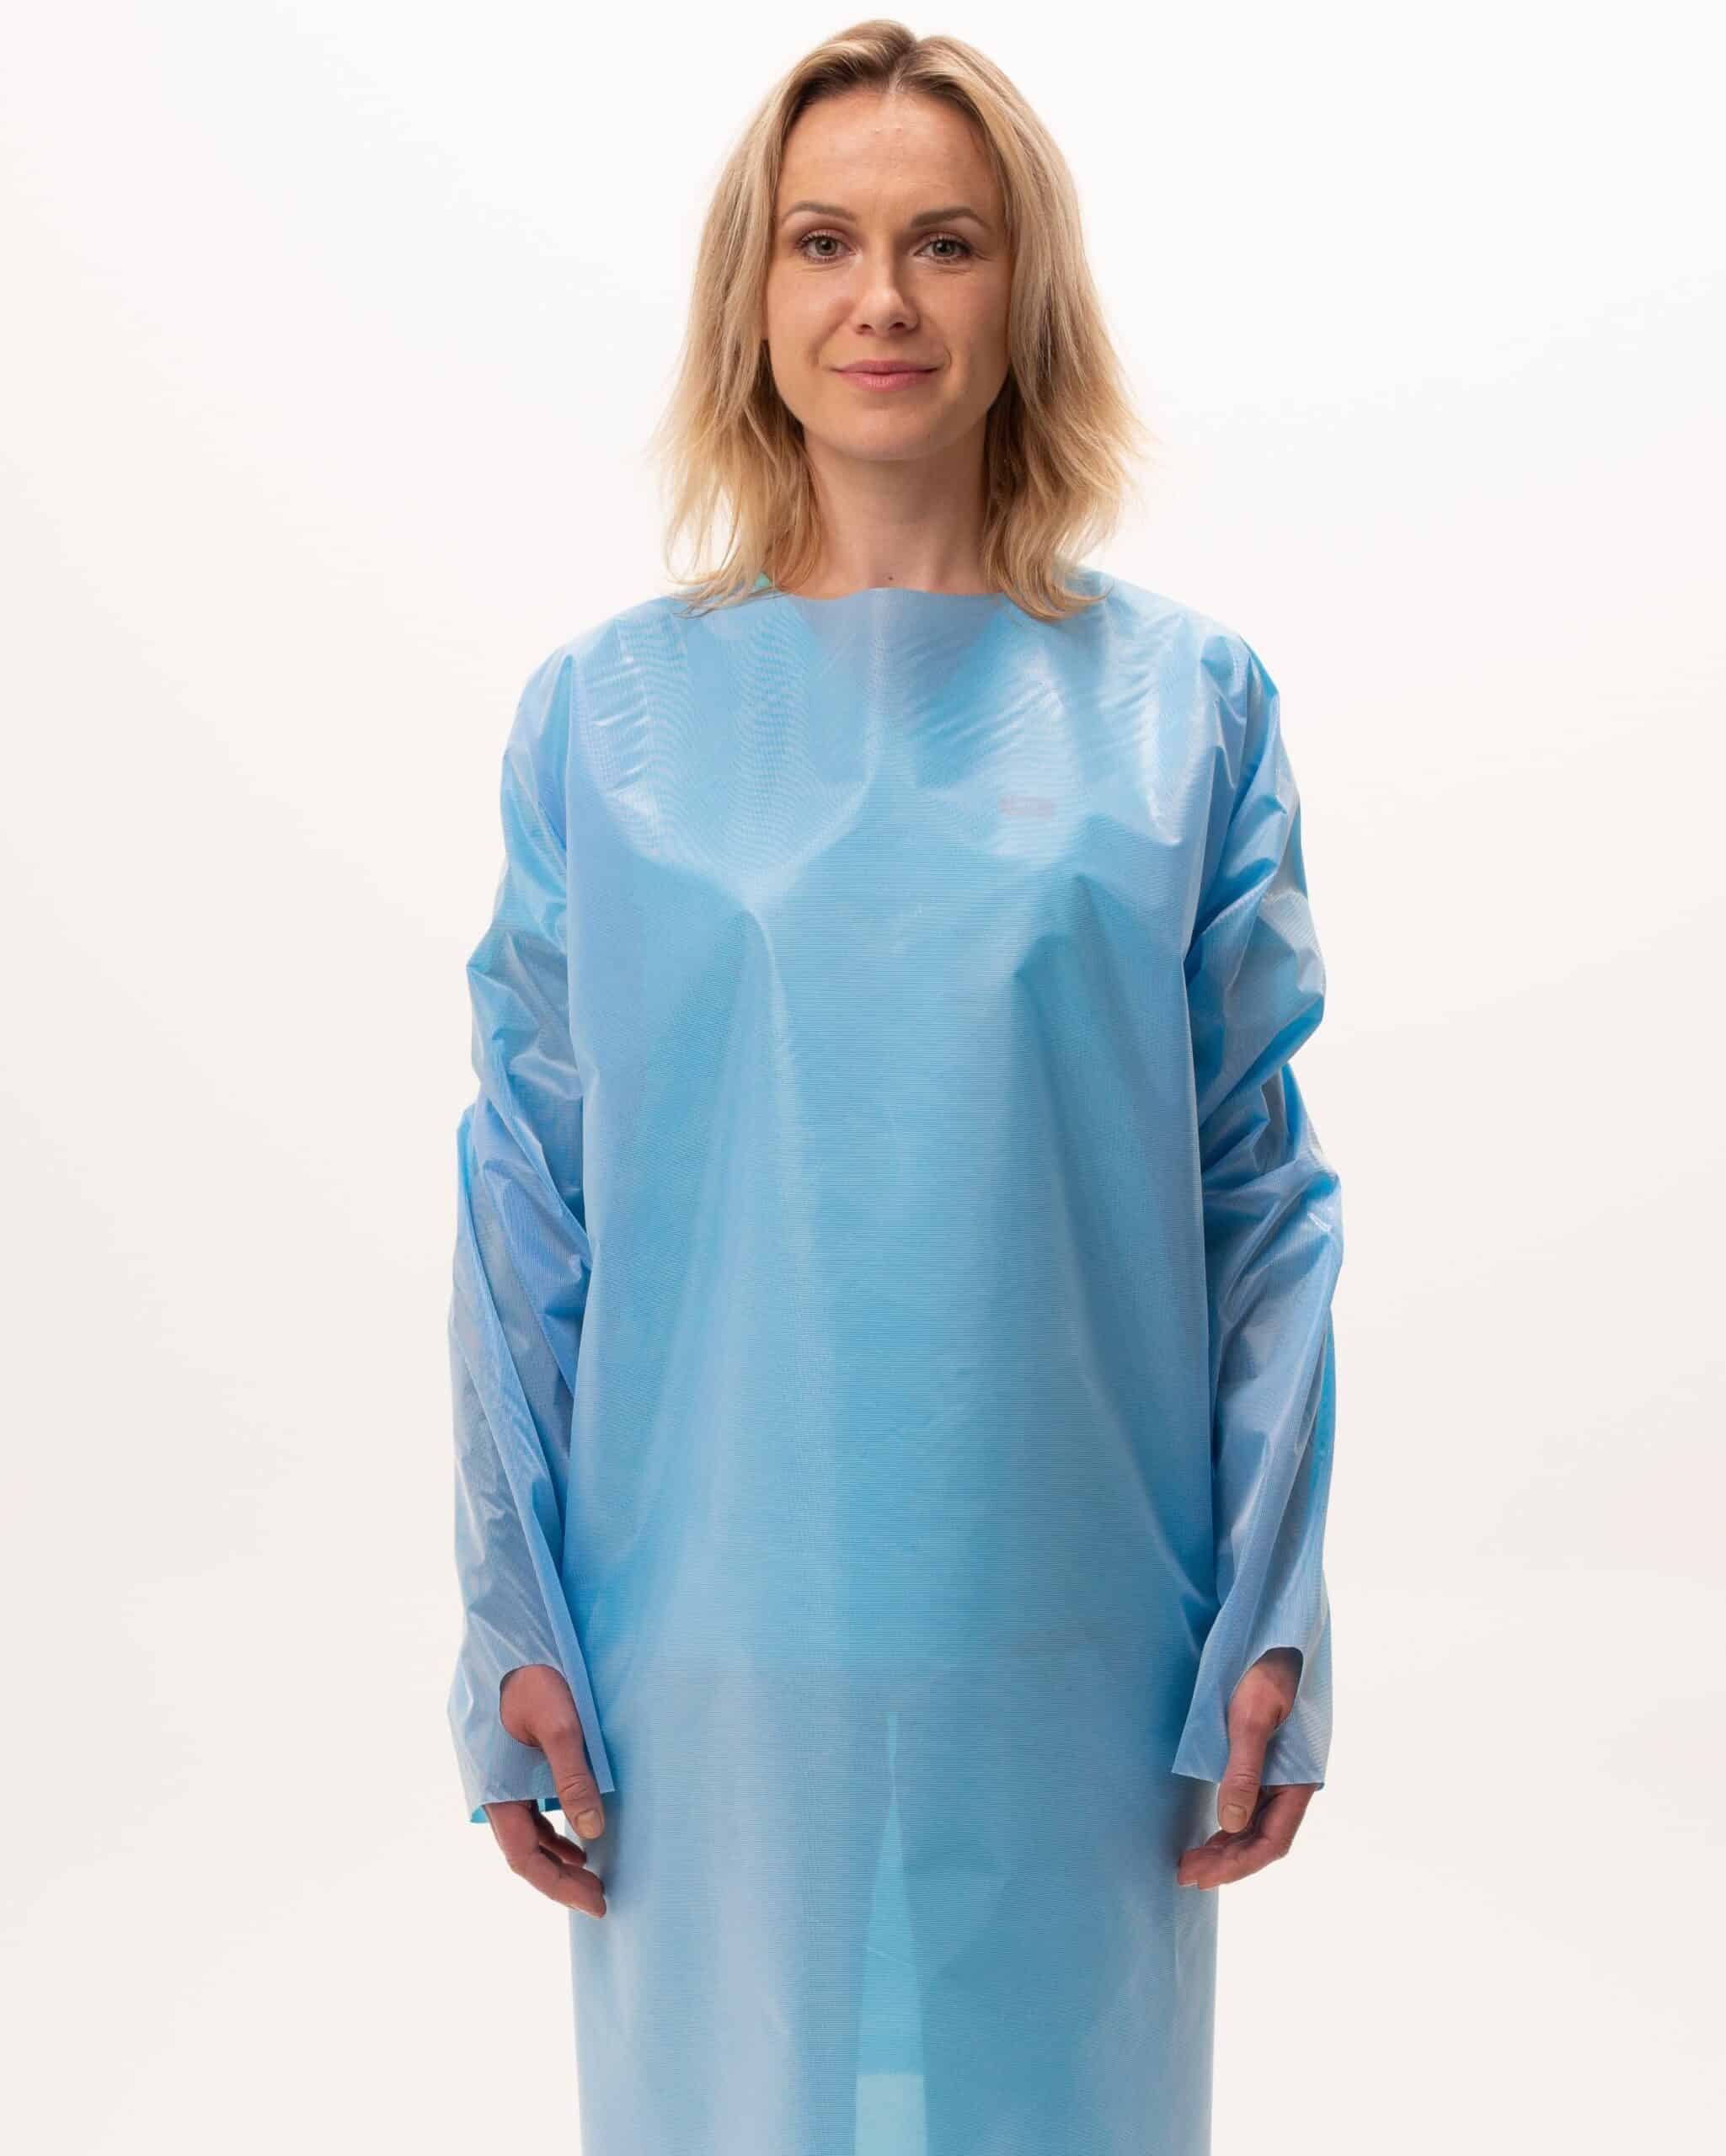 Reusable and Disposable Isolation Gowns